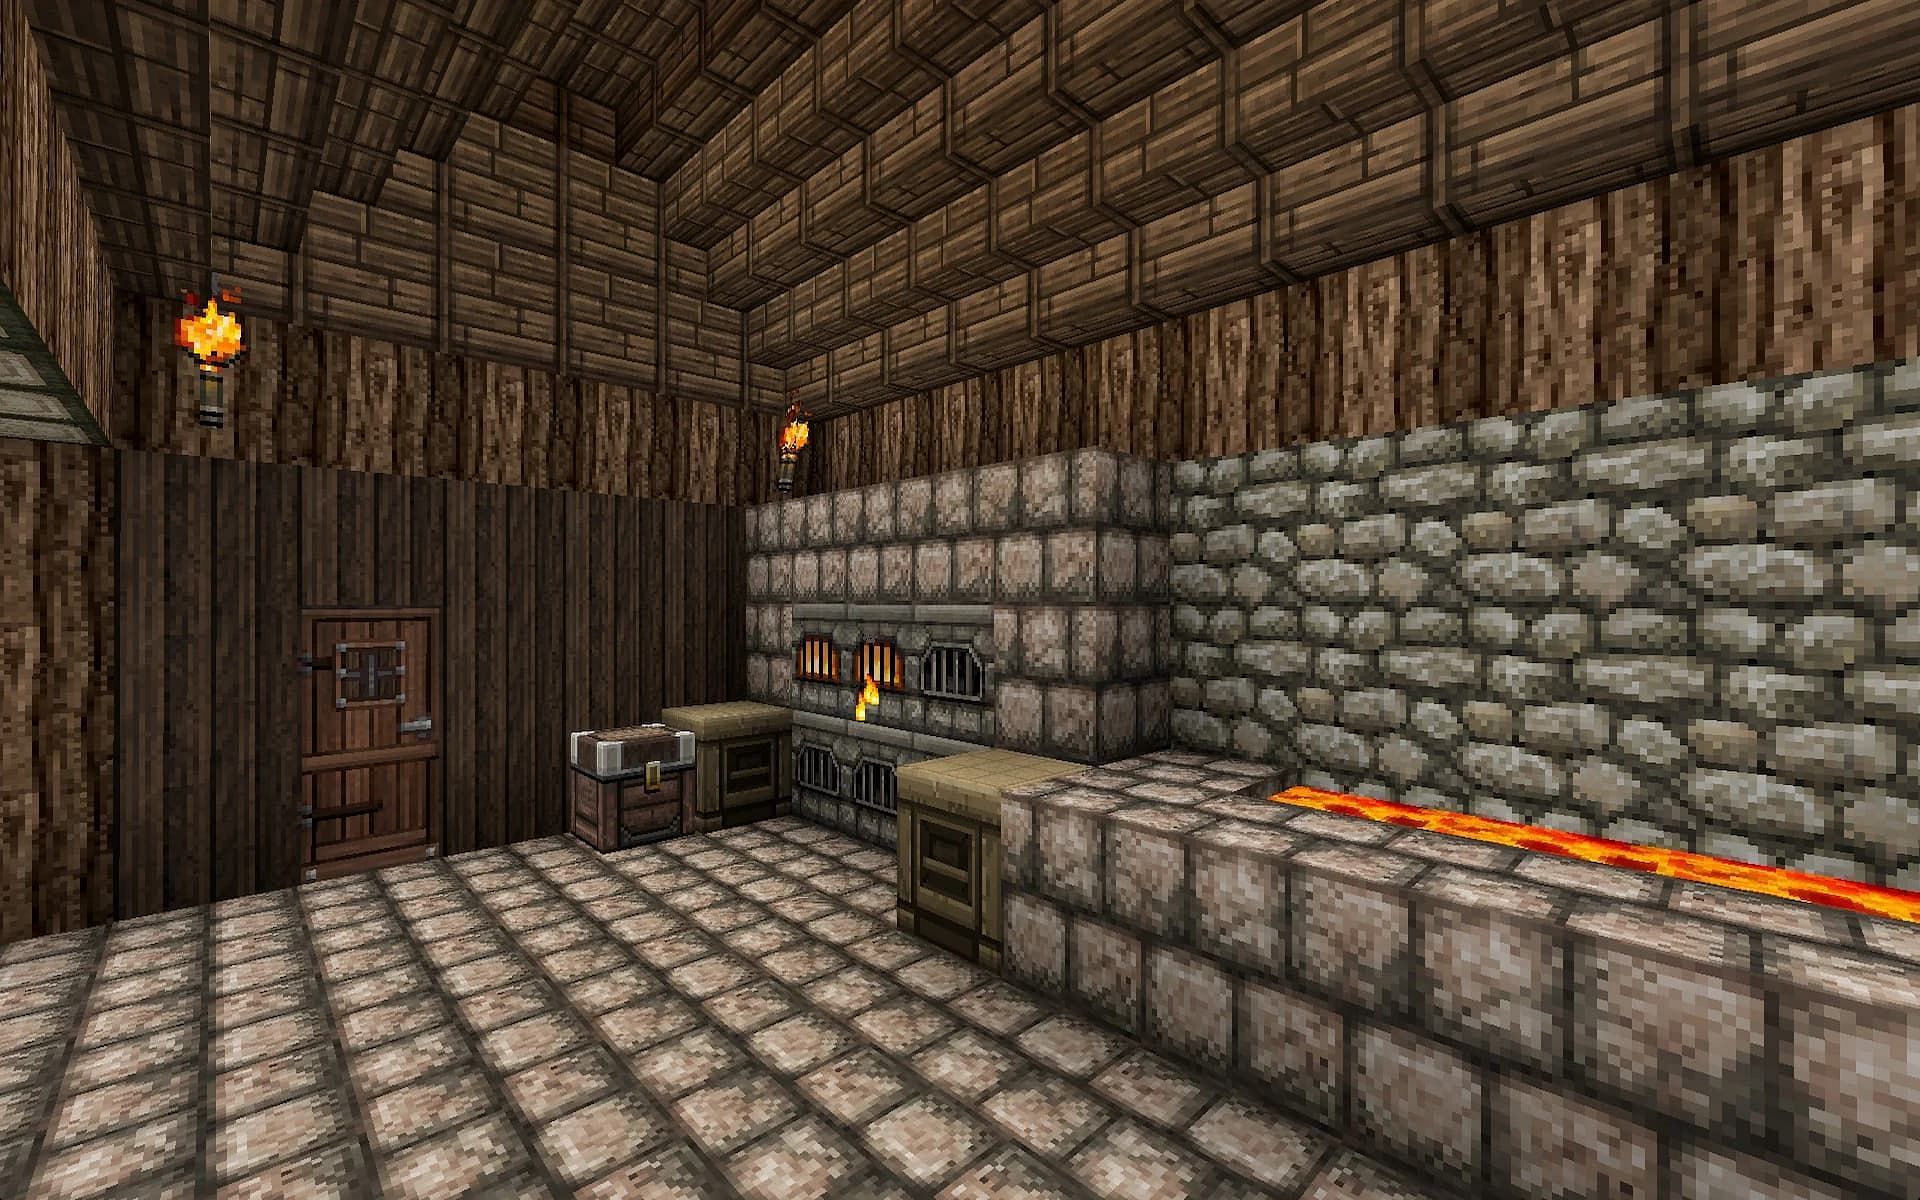 Texture packs can change the game and make it more realistic (Image via minecrafttexturepacks.com)